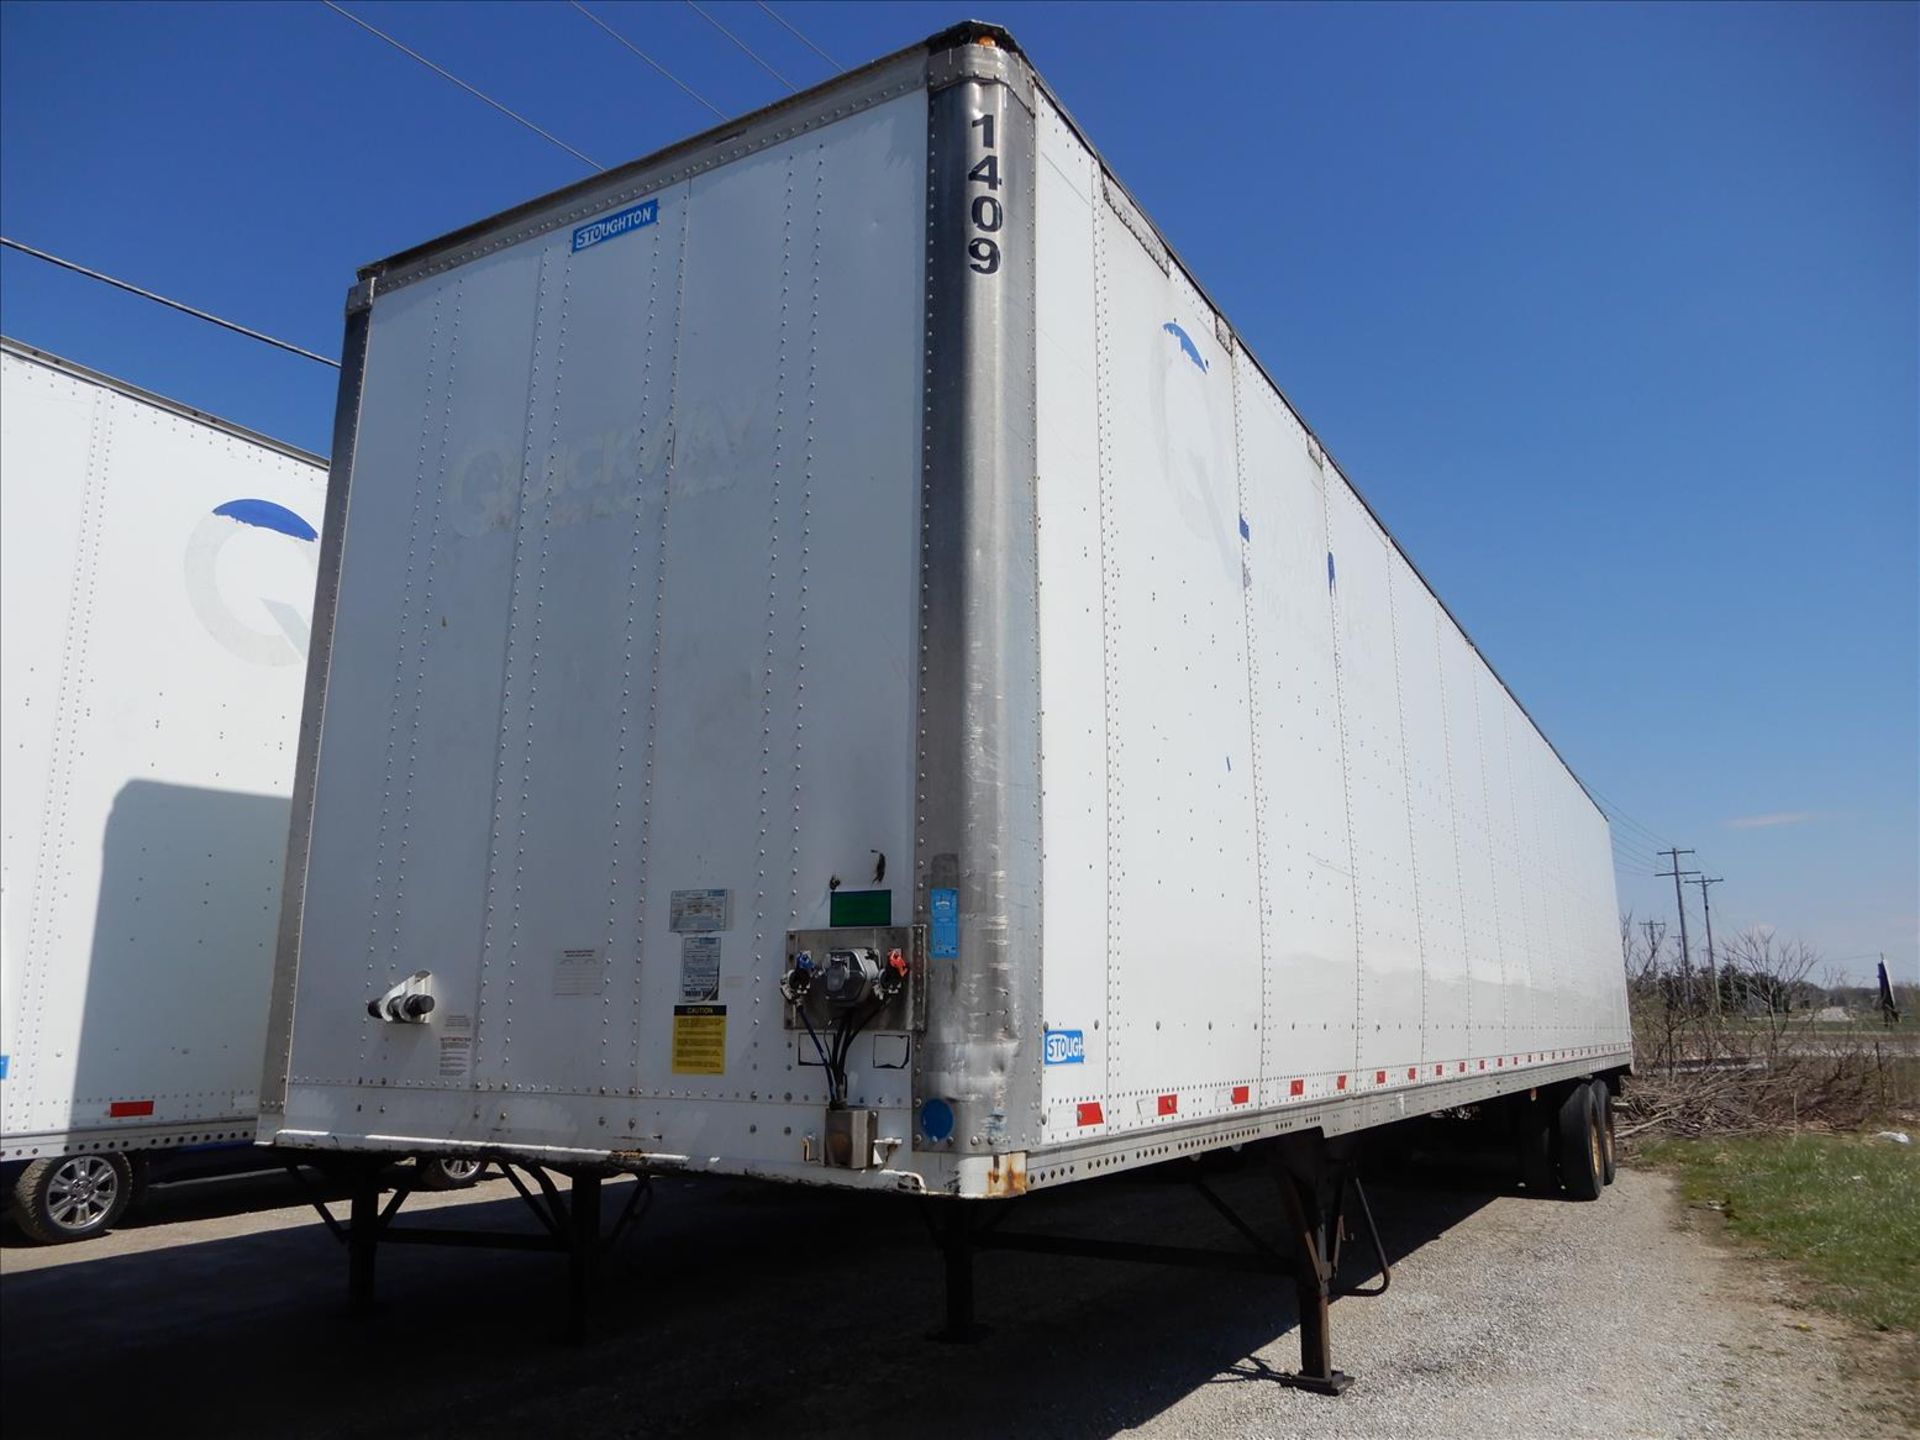 2012 Stoughton Trailer - Located in Indianapolis, IN